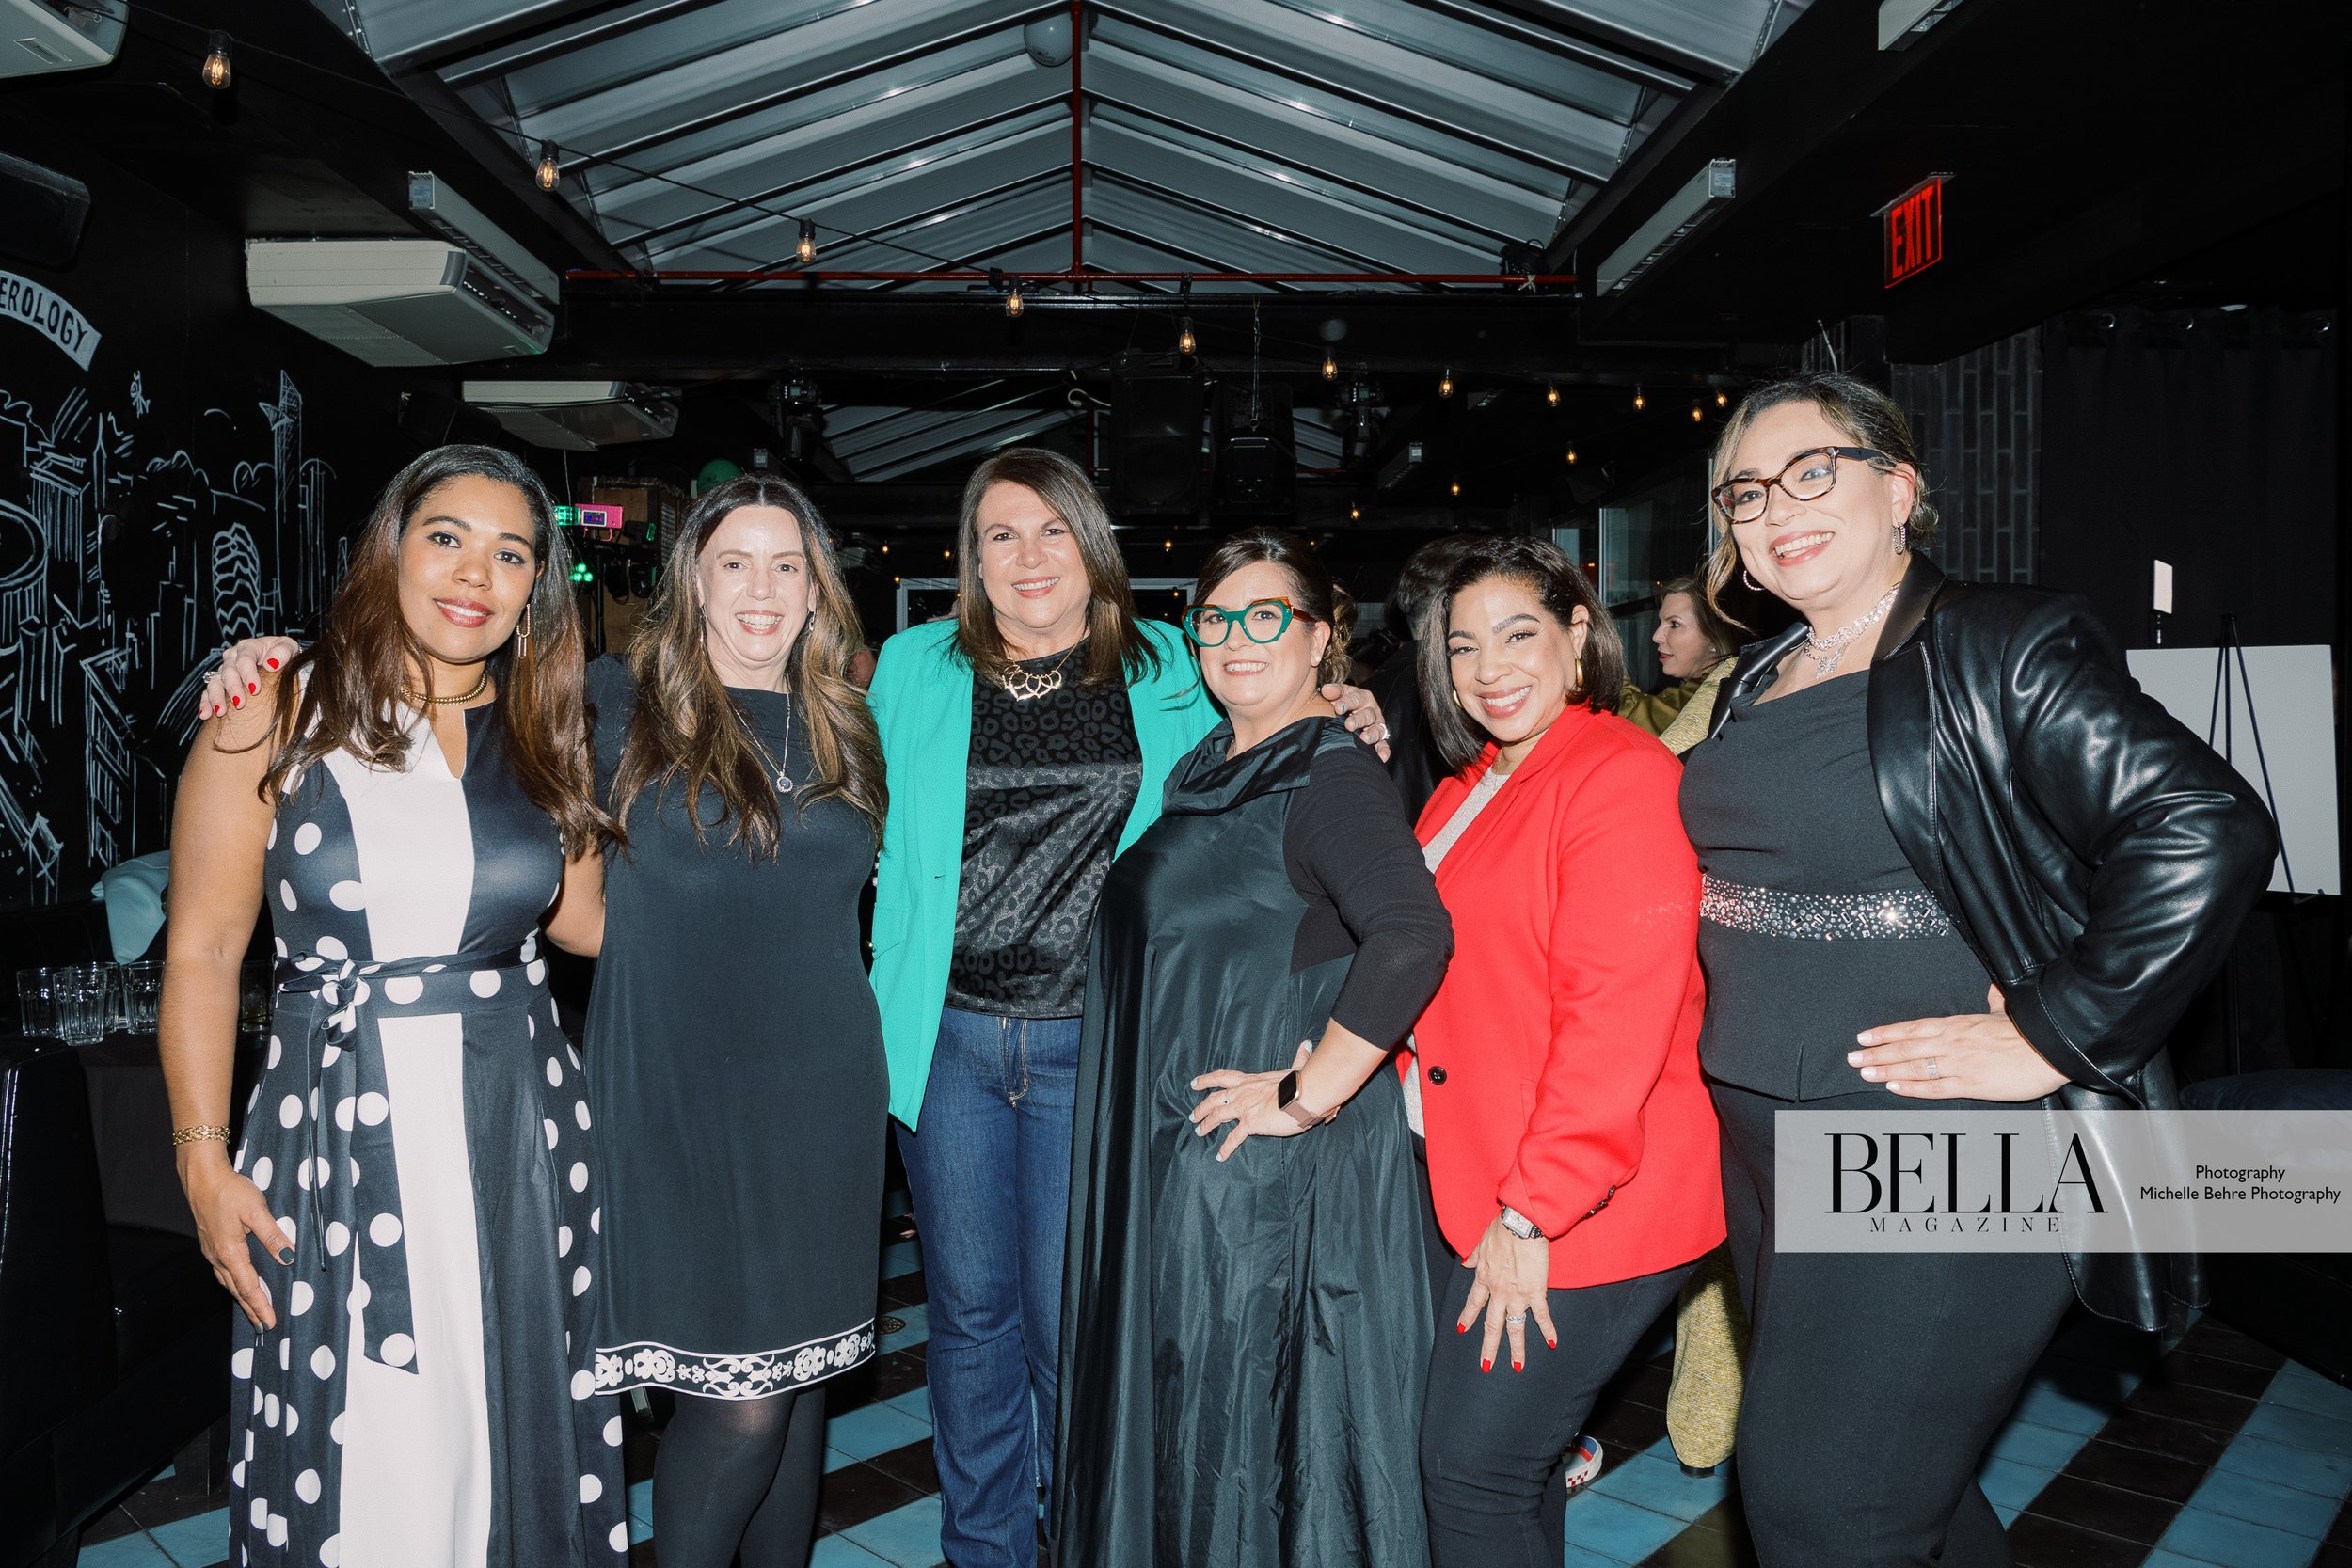 COVERPARTY2Michelle-Behre-Creative-Co-BELLA-Magazine-Women-of-Influence-Cover-Party-Burgerology-272.jpg